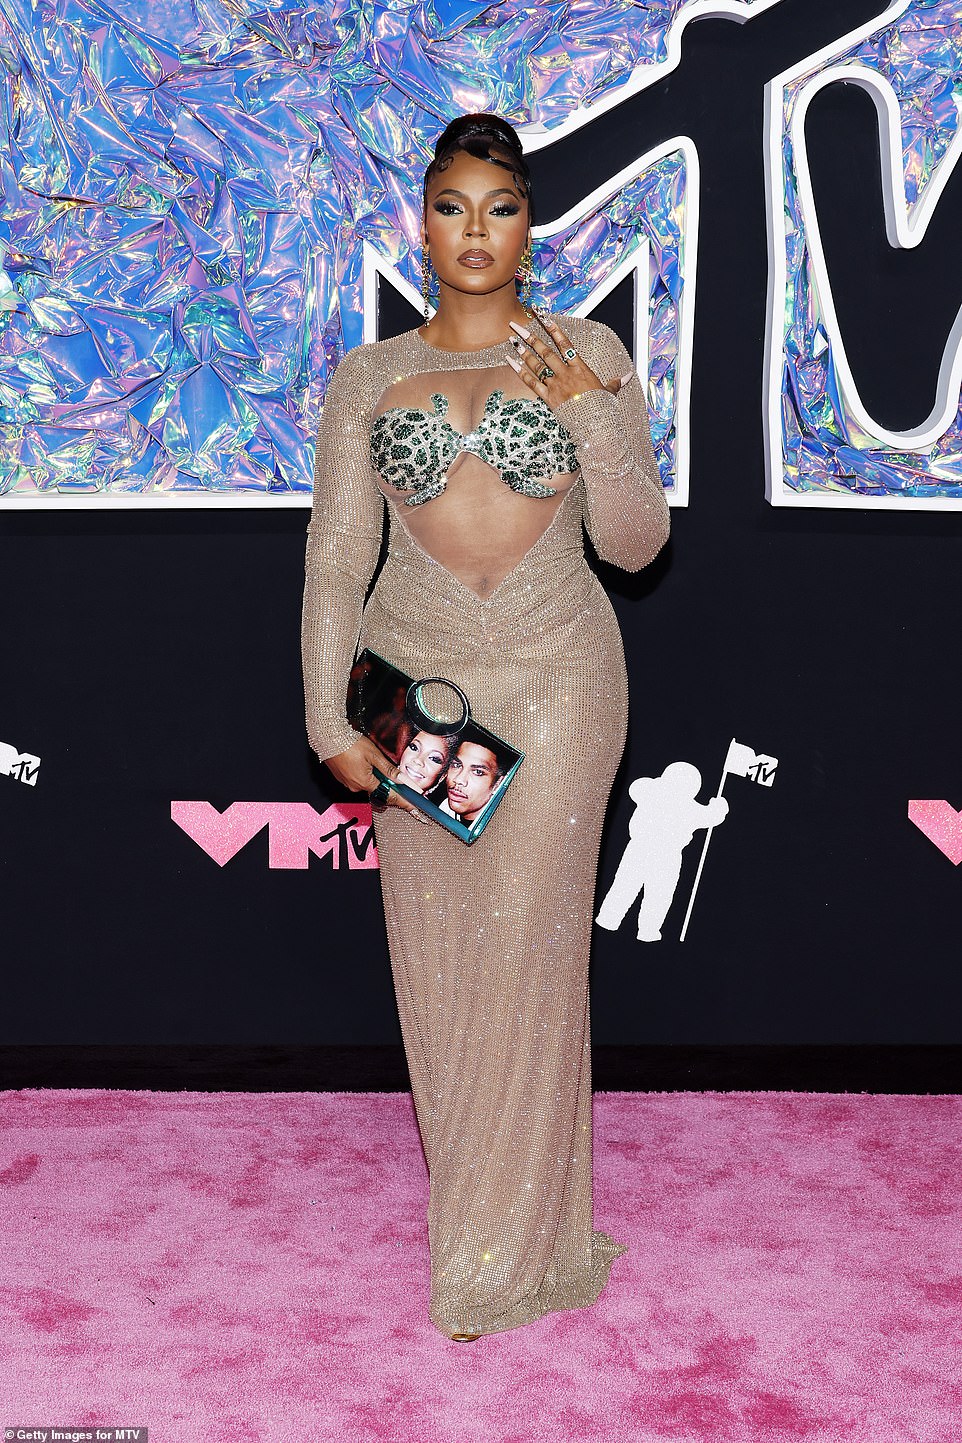 Strike a pose: Ashanti opted for a sheer beige and aquamarine cut-out dress, adding a bag featuring an image of her and her boyfriend Nelly, confirming their rekindled romance